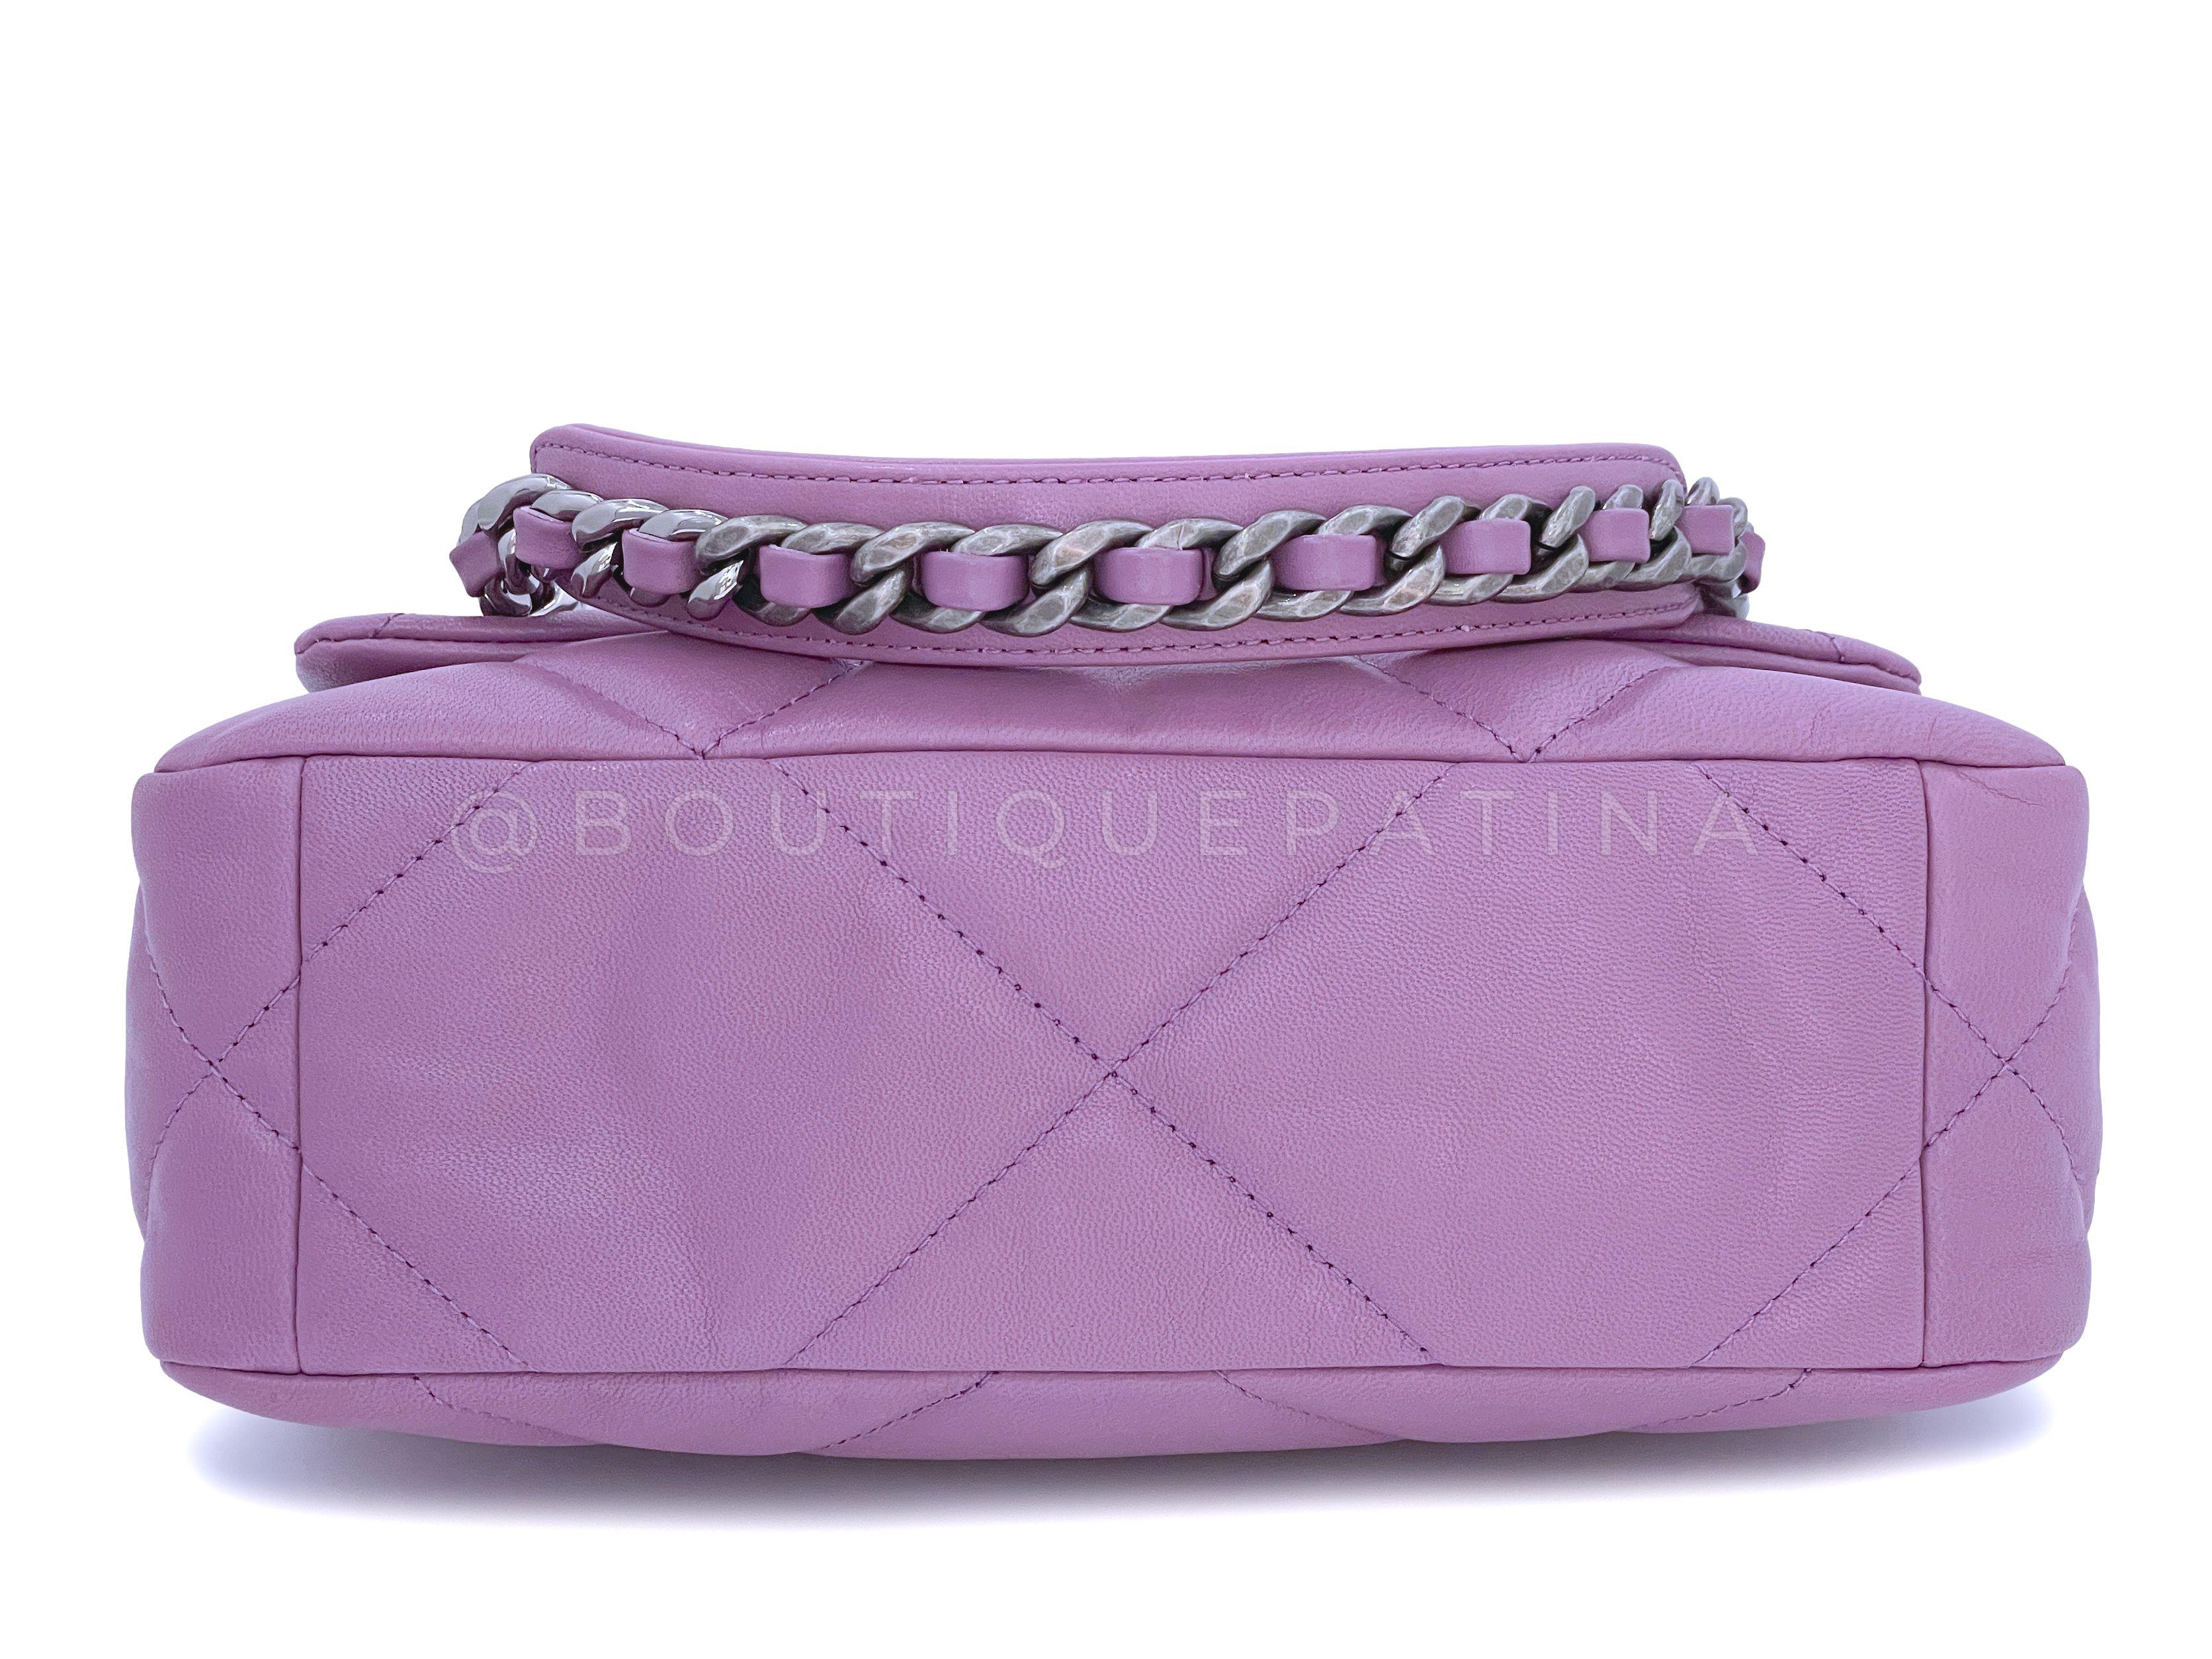 Chanel 19 20B Lavender Mauve Medium Flap Bag 65463 In Excellent Condition For Sale In Costa Mesa, CA